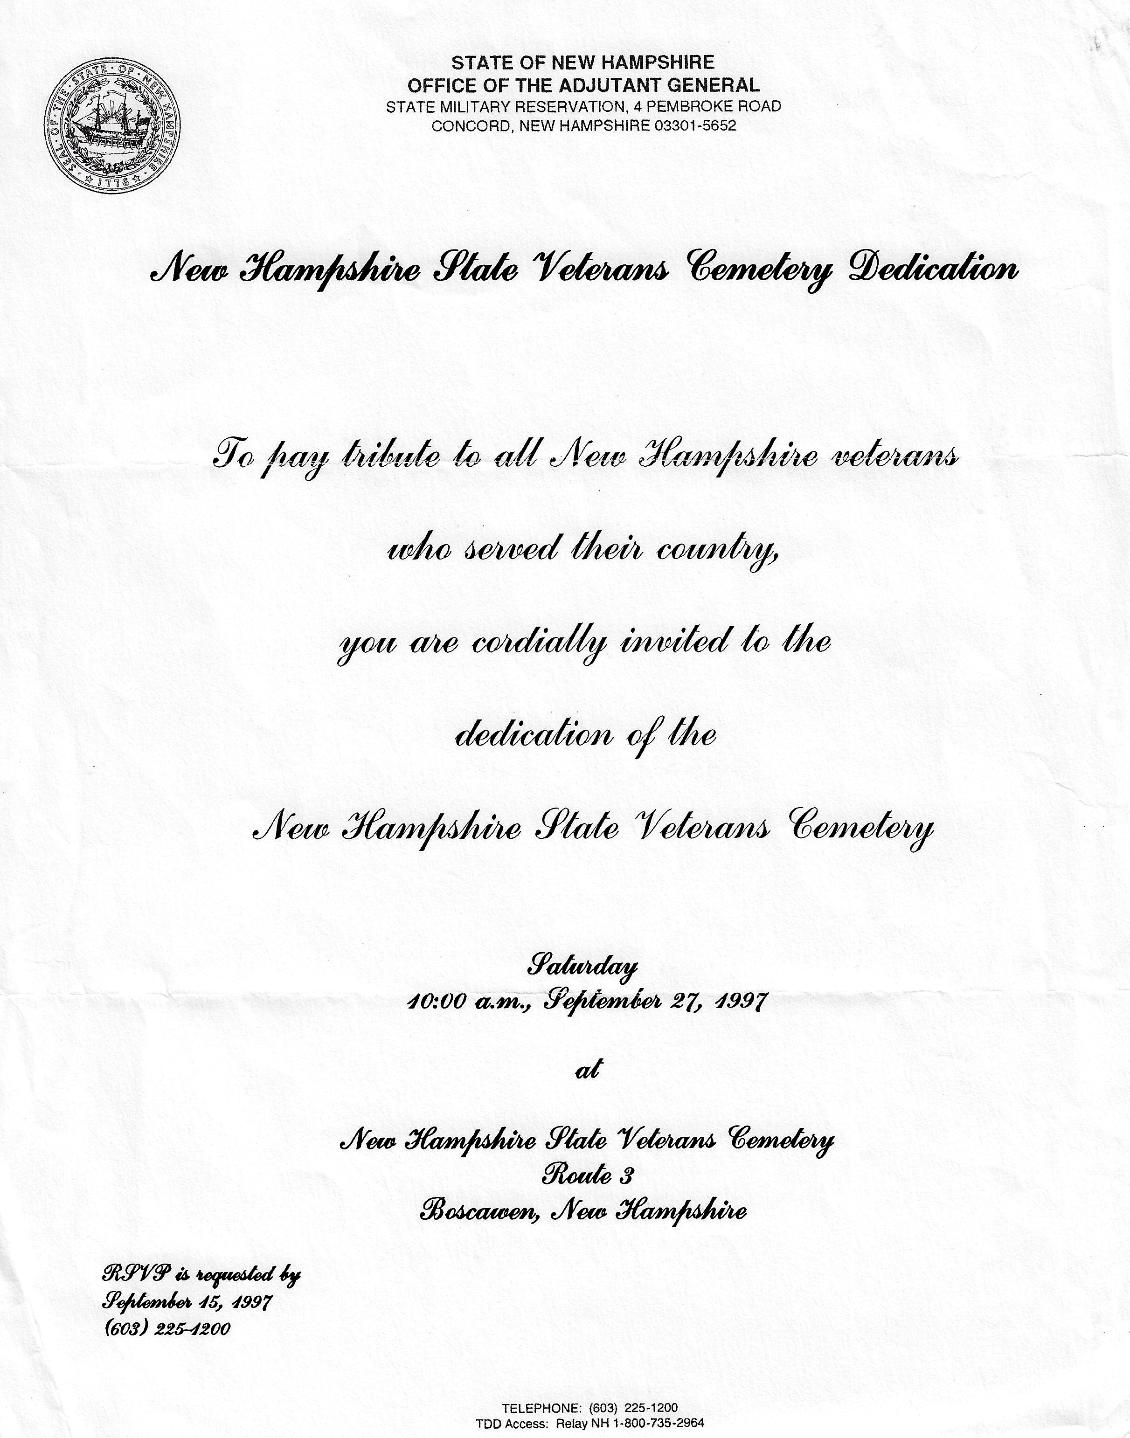 Invitation to the NH State Veterans Cemetery Dedication Ceremony September 27 1997